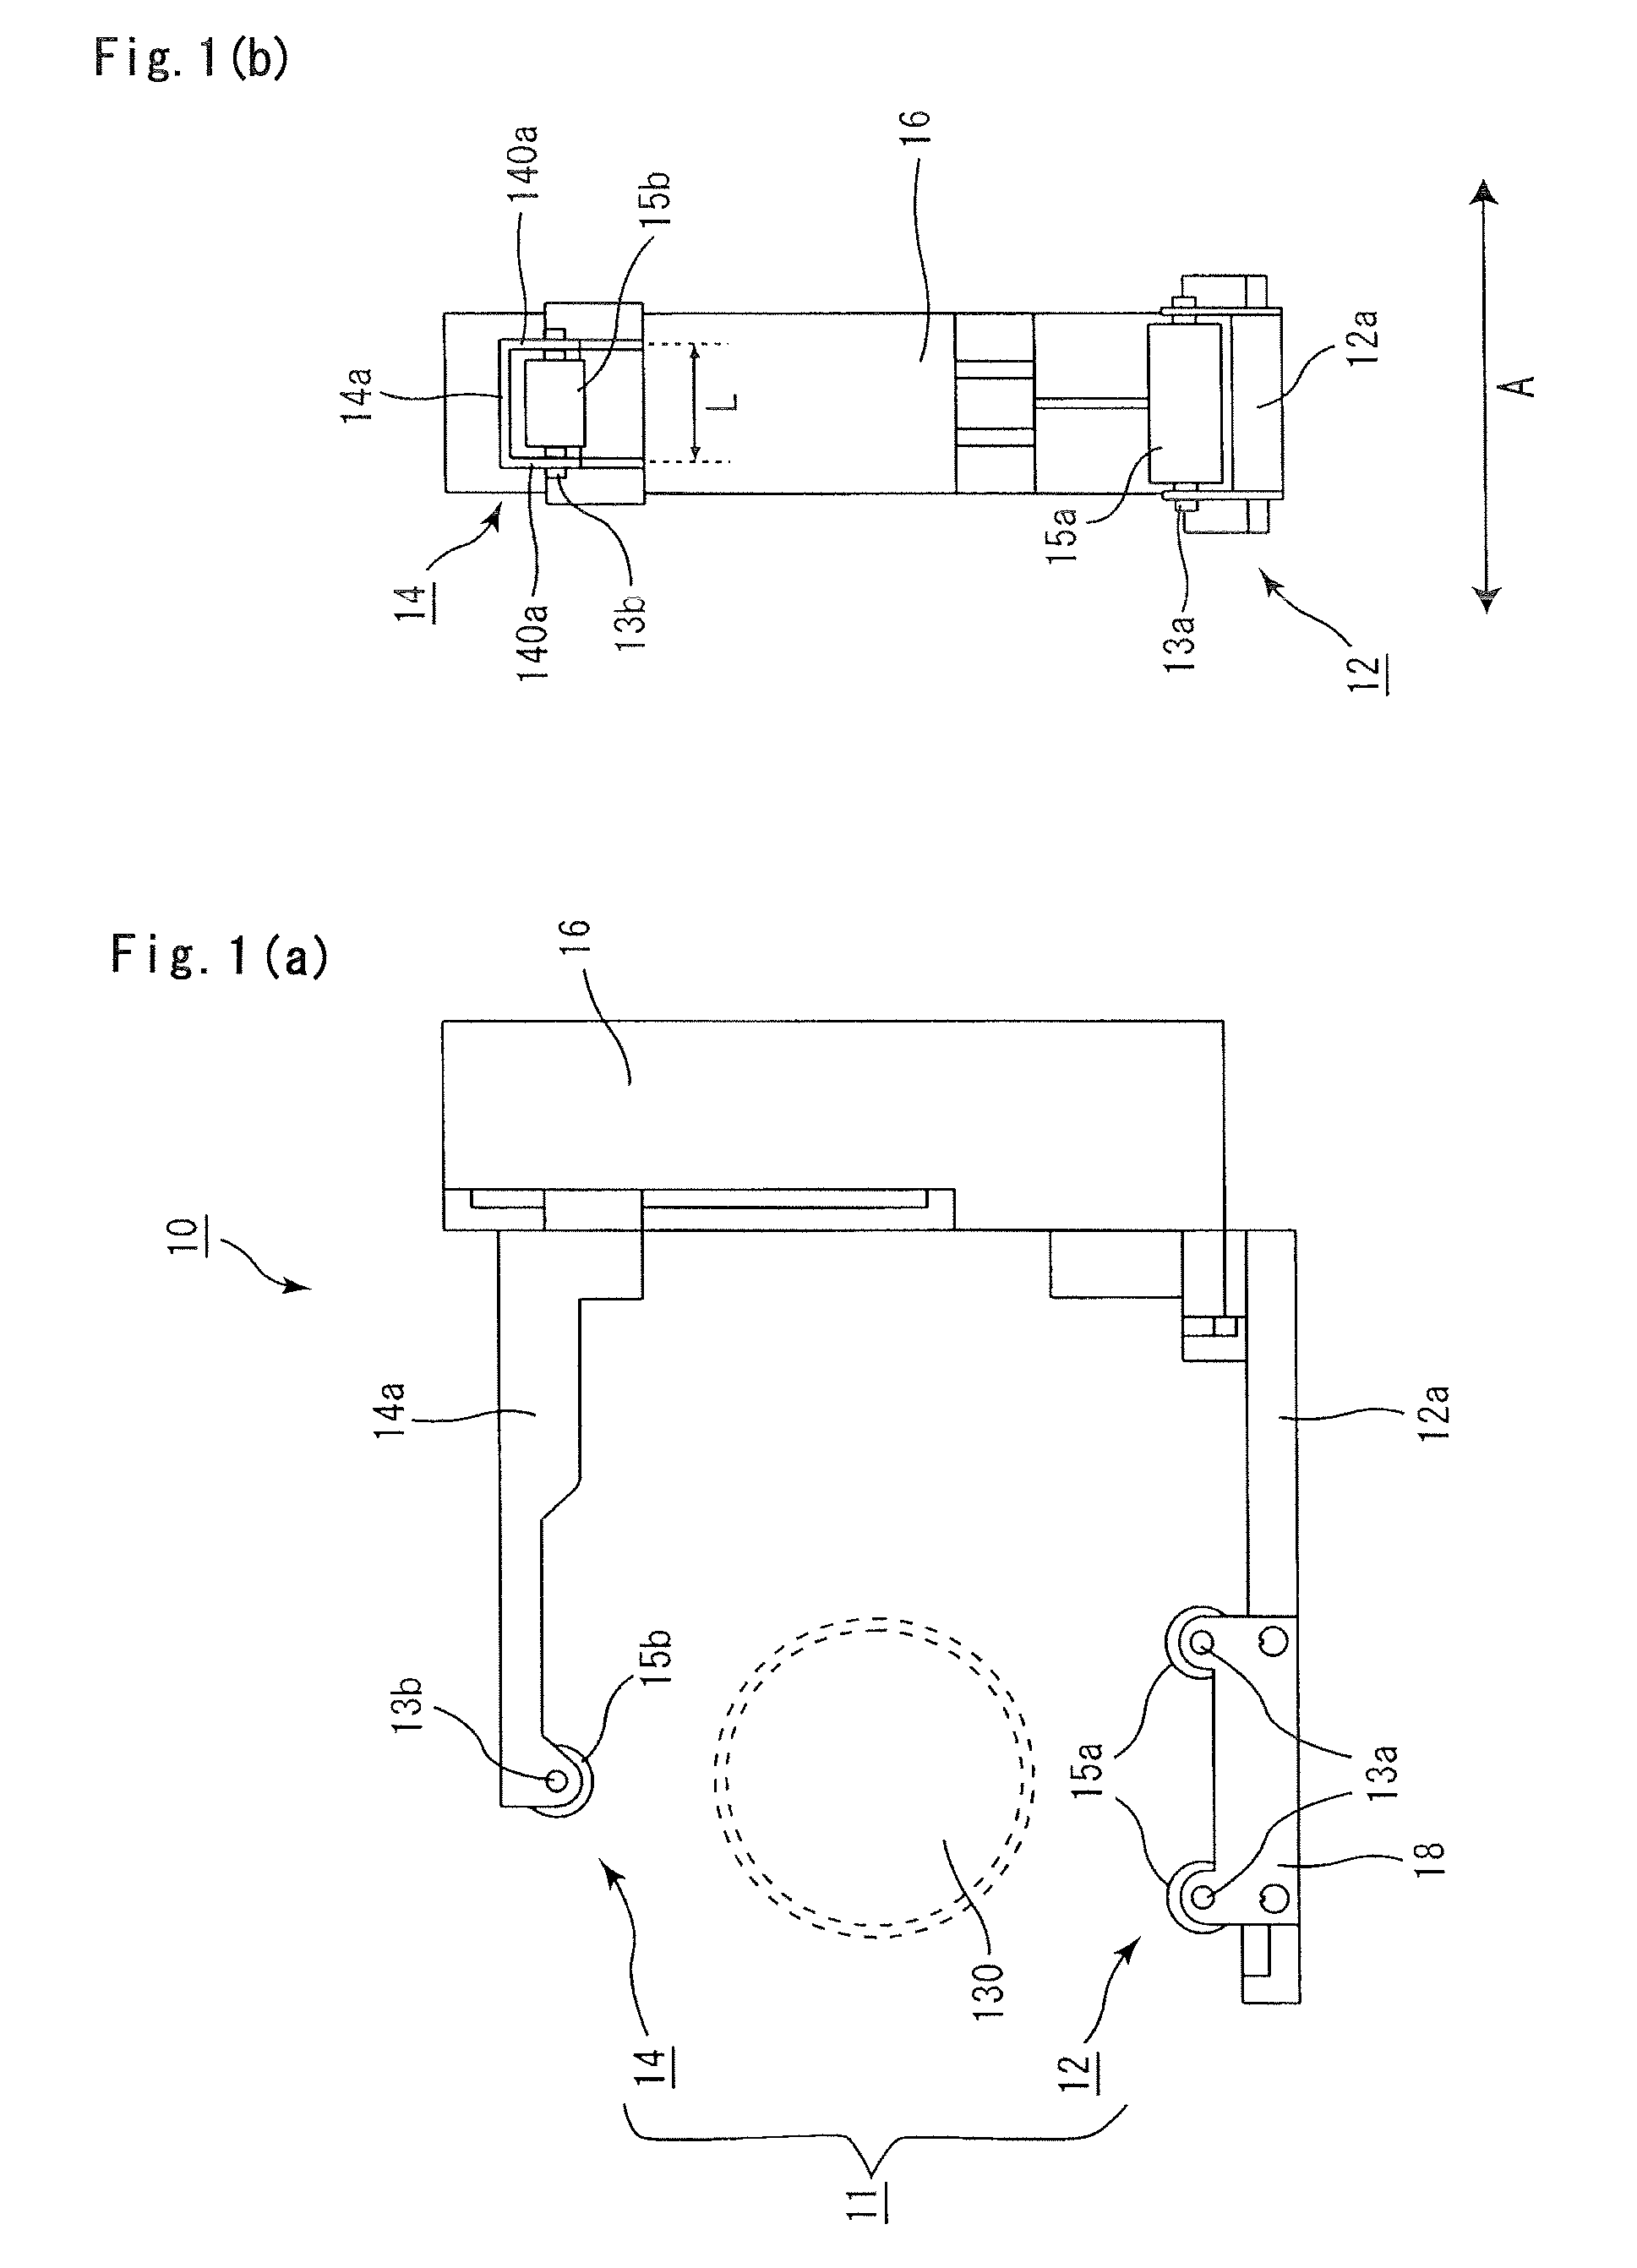 Holding apparatus and method for manufacturing honeycomb structure